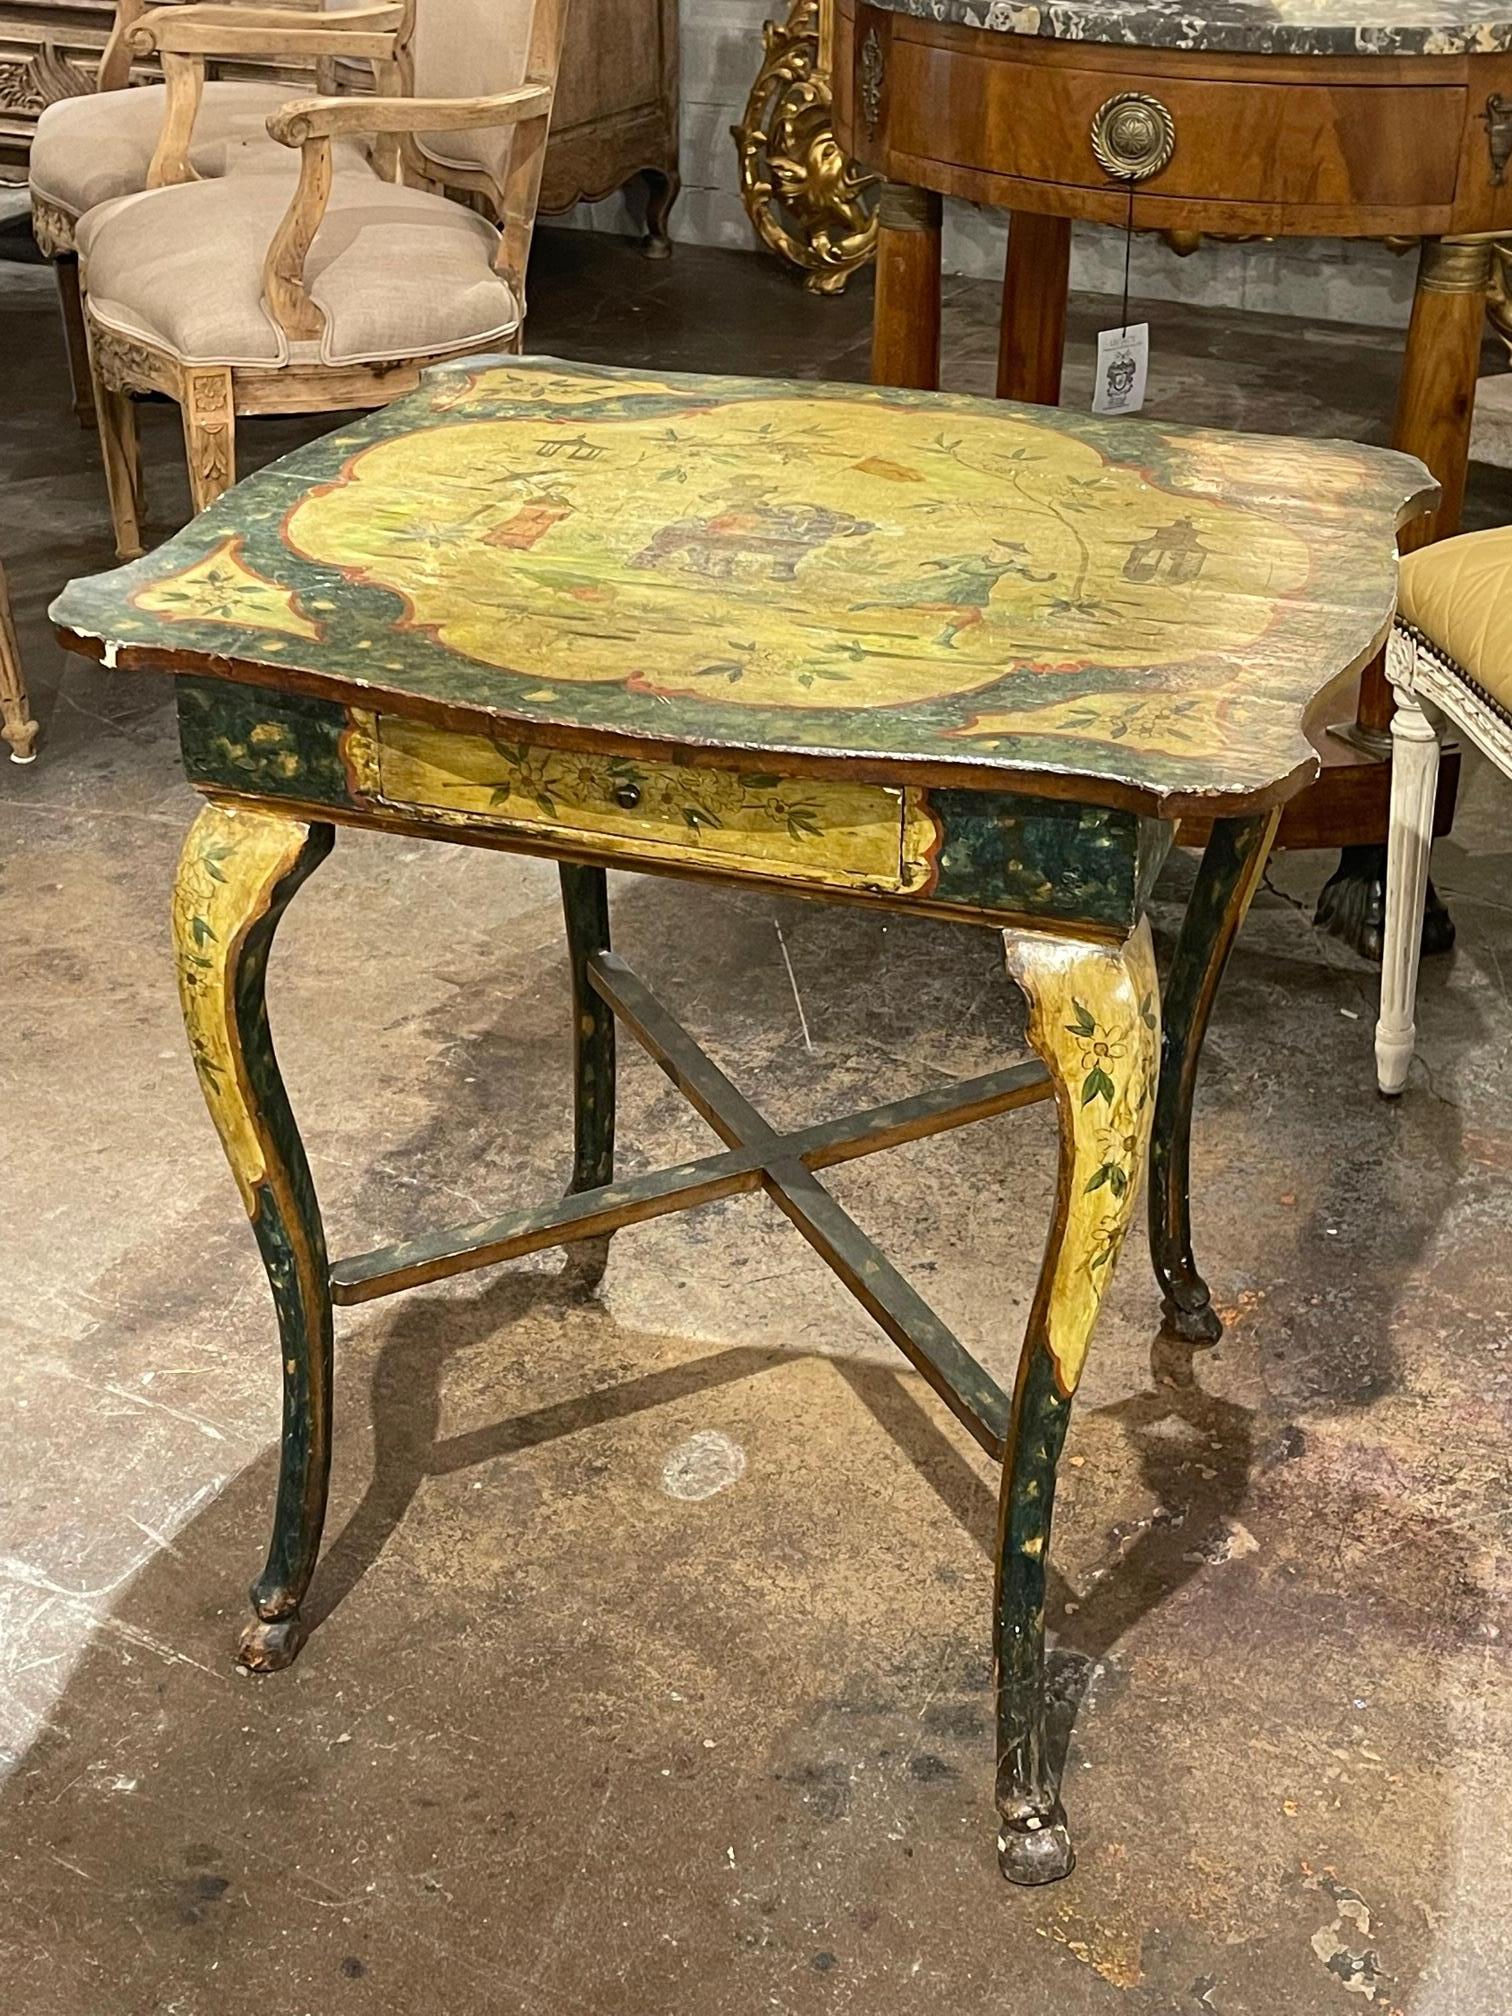 Beautiful decorative 19th century Italian Chinoiserie painted side table. Featuring a man riding on an elephant. So interesting! A real work of art.